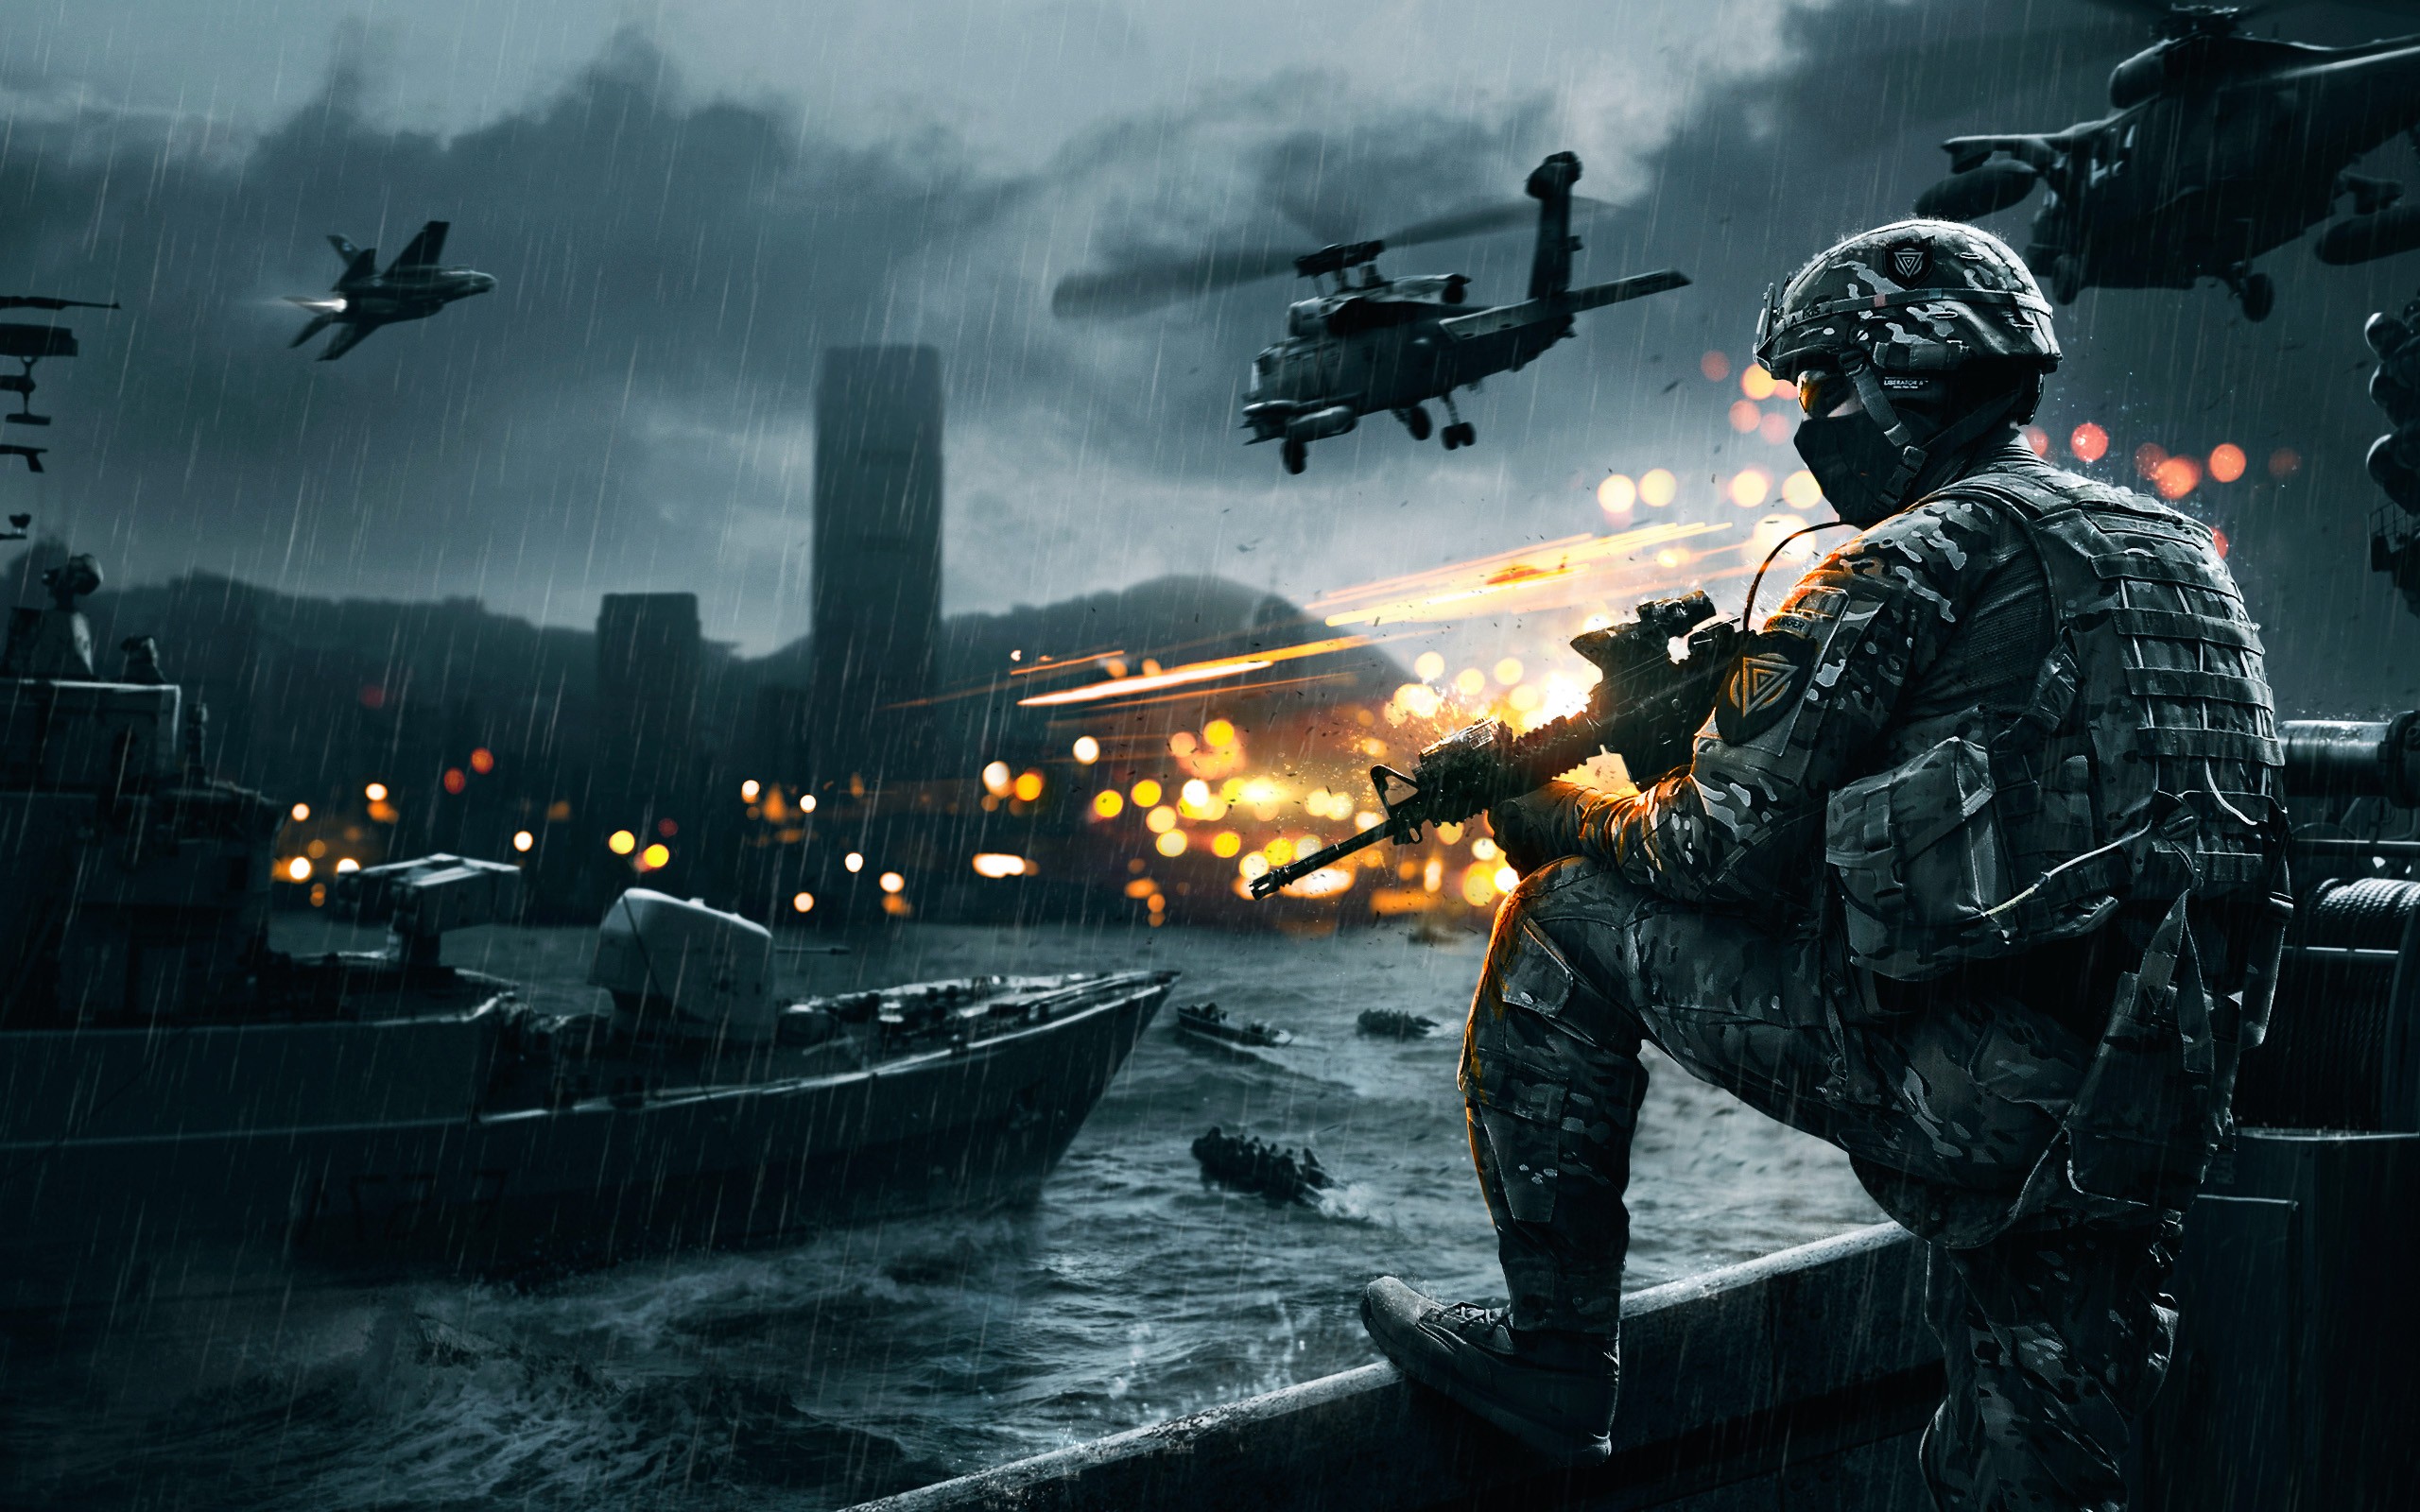 military, soldier, helicopter, battlefield, warship, video game, battlefield 4 iphone wallpaper